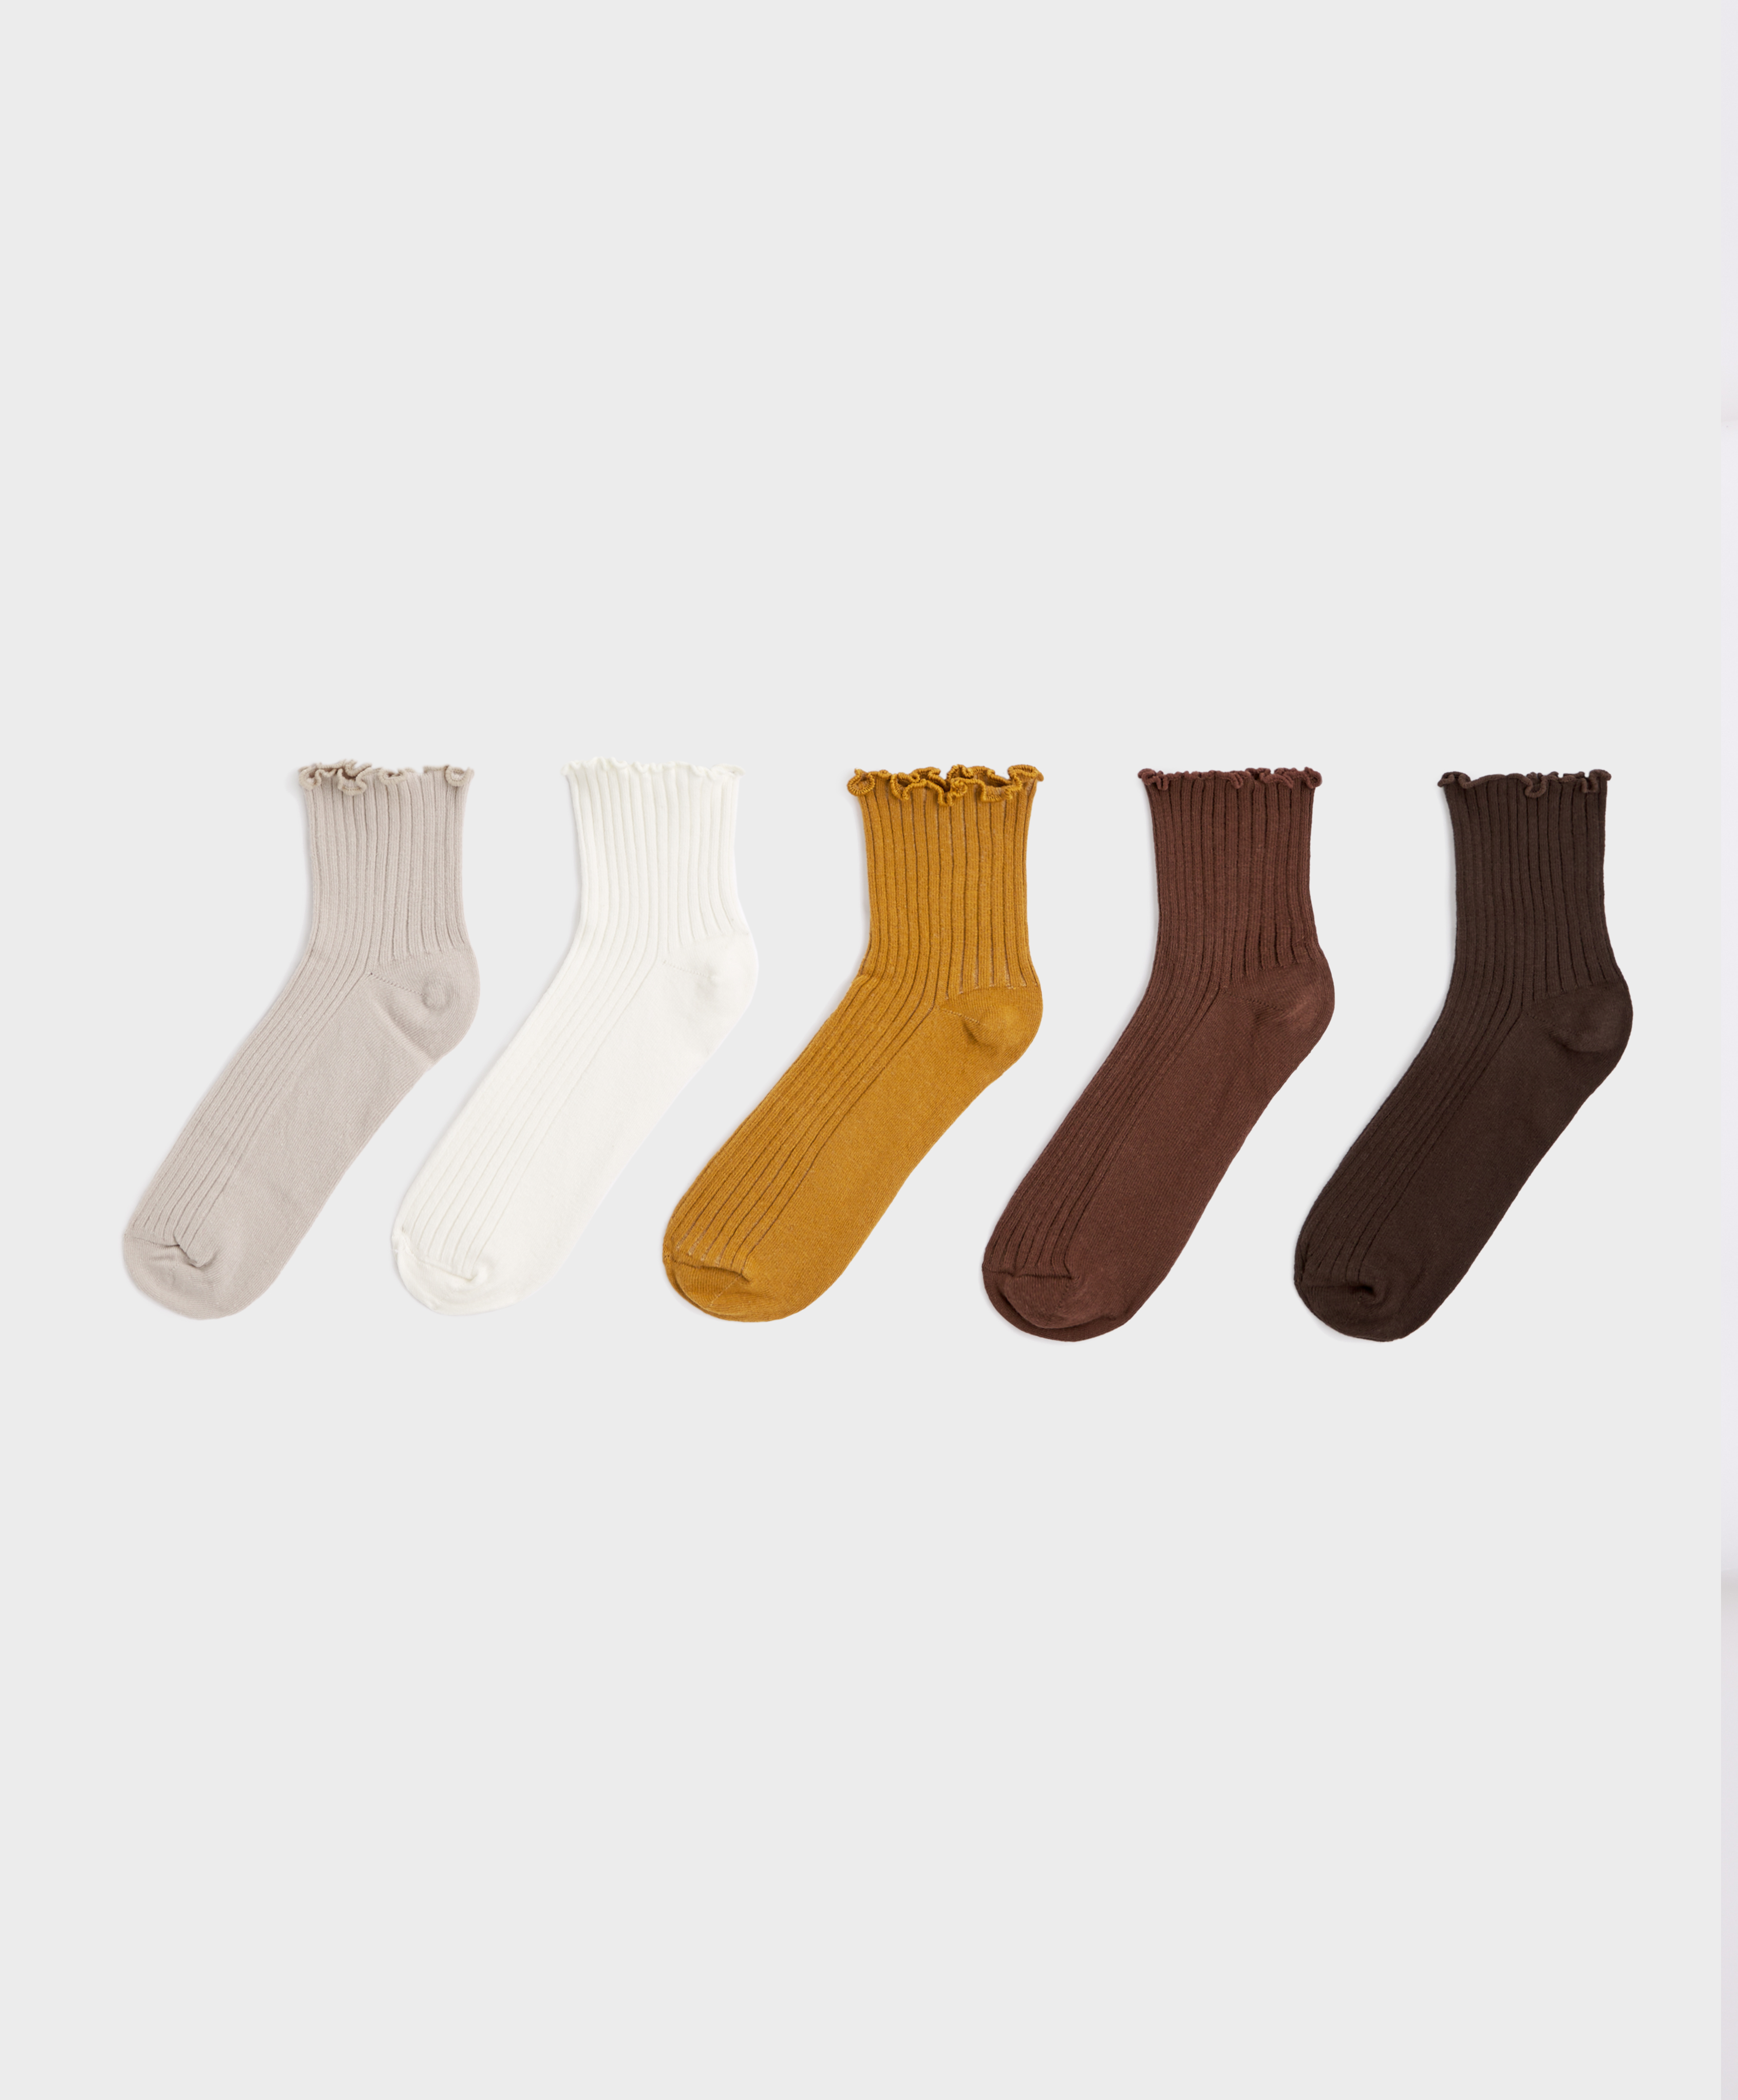 5 pairs of cotton quarter socks with curled edge